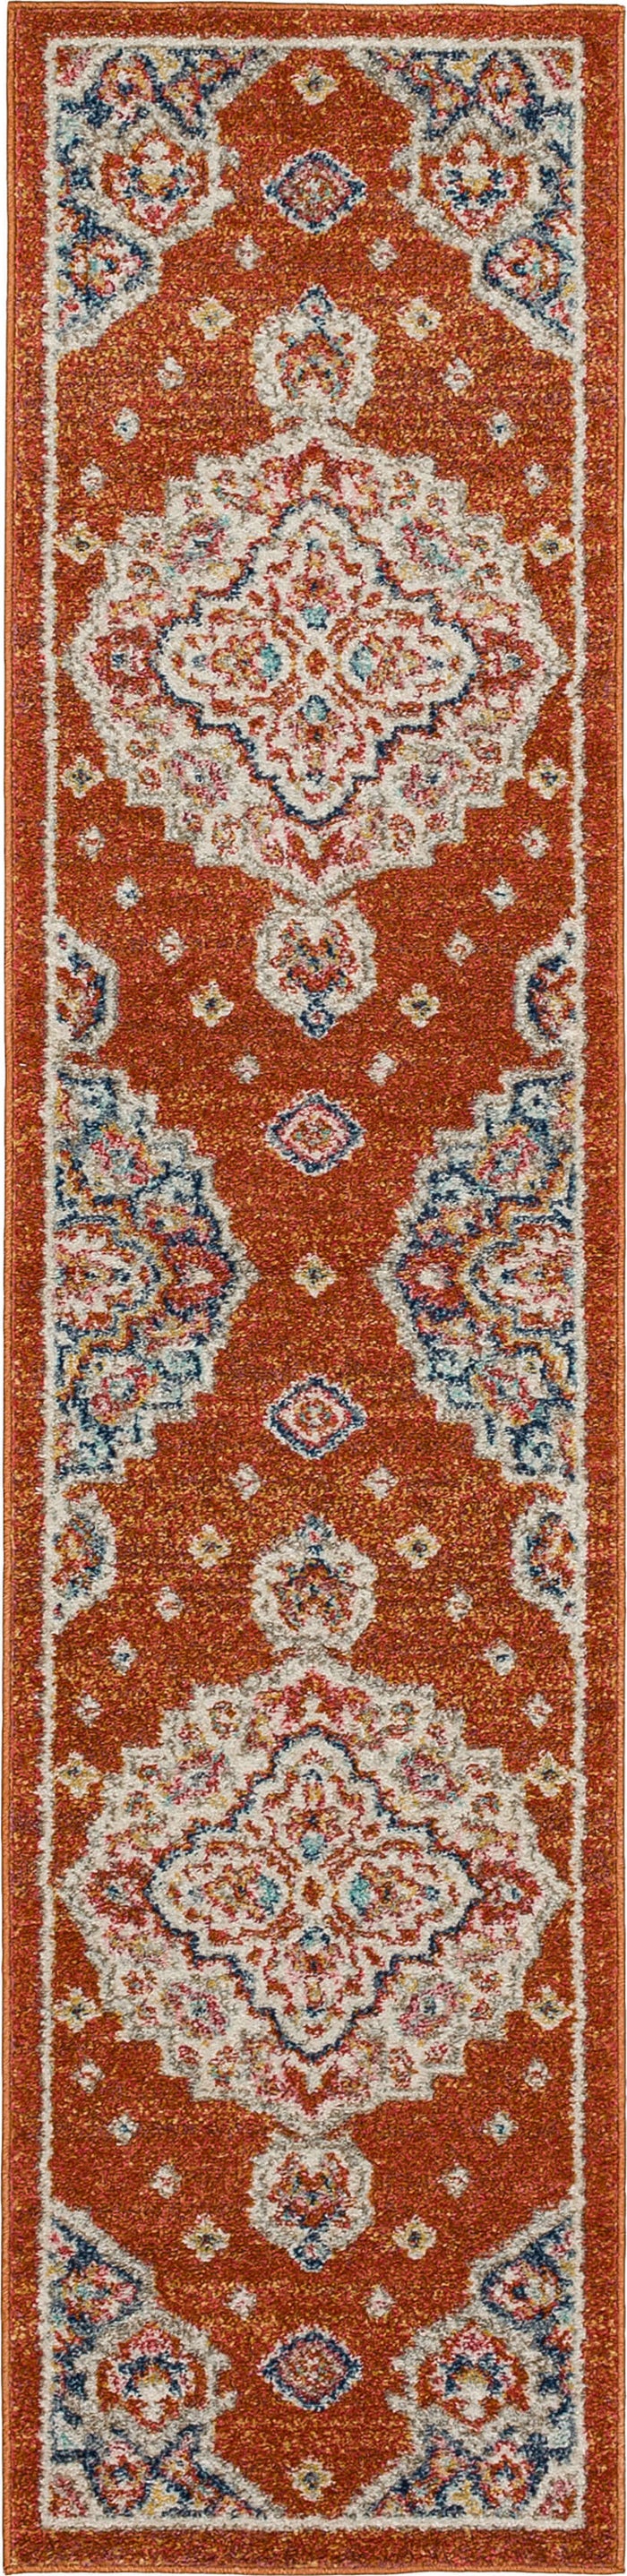 Arden Catalina Red Area Rug